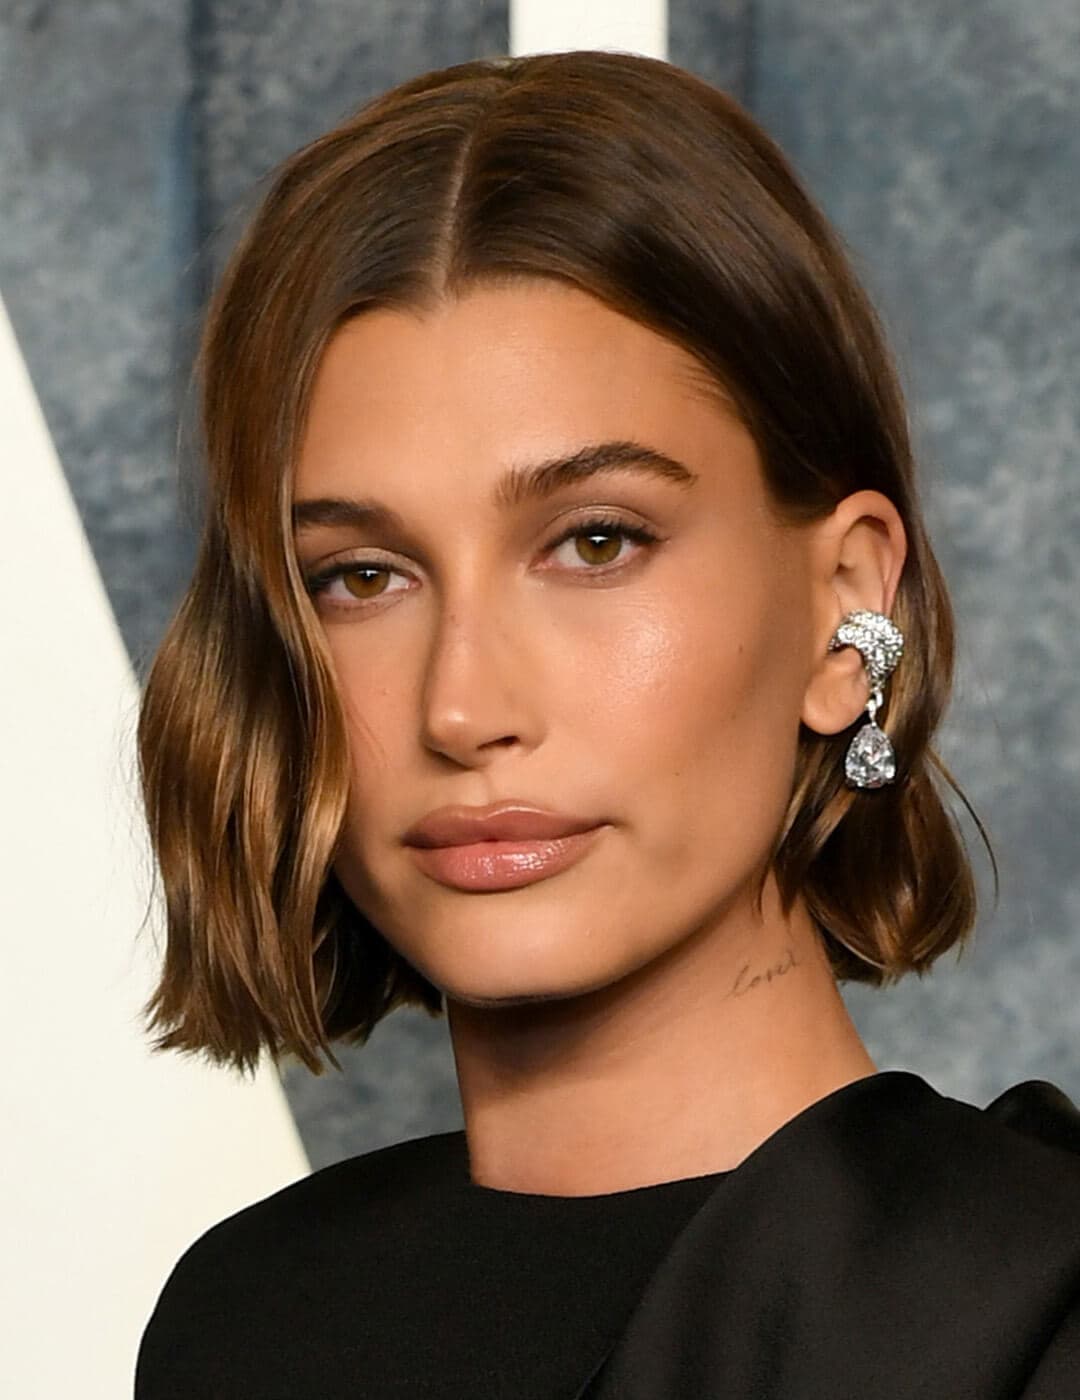 Hailey Bieber attends the 2023 Vanity Fair Oscar Party Hosted By Radhika Jones at Wallis Annenberg Center for the Performing Arts on March 12, 2023 in Beverly Hills, California.